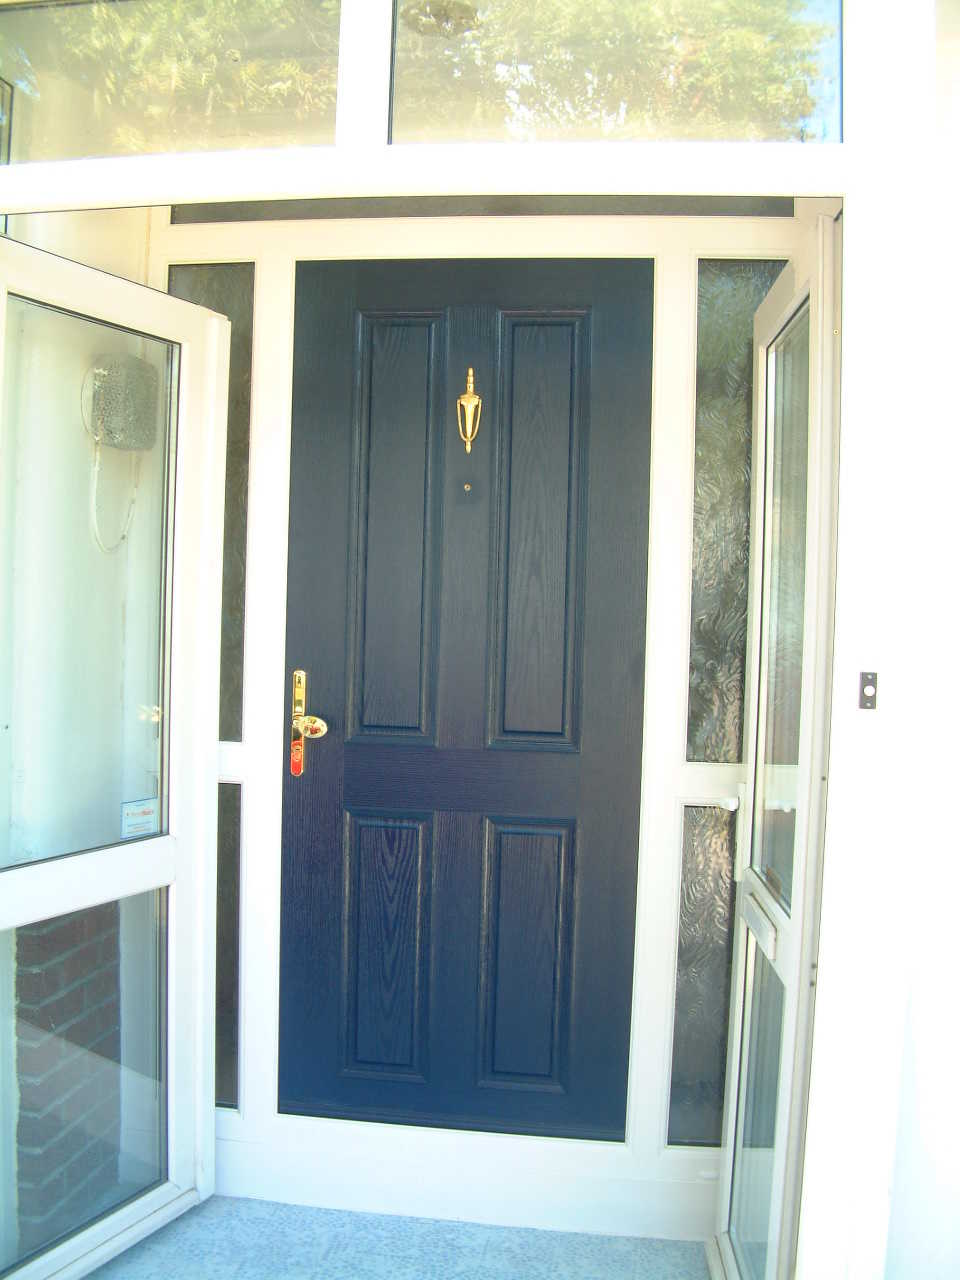 BLUE APEER APL1  DOOR WITH WHITE FRAME FITTED BY ASGARD WINDOWS IN DUBLIN.